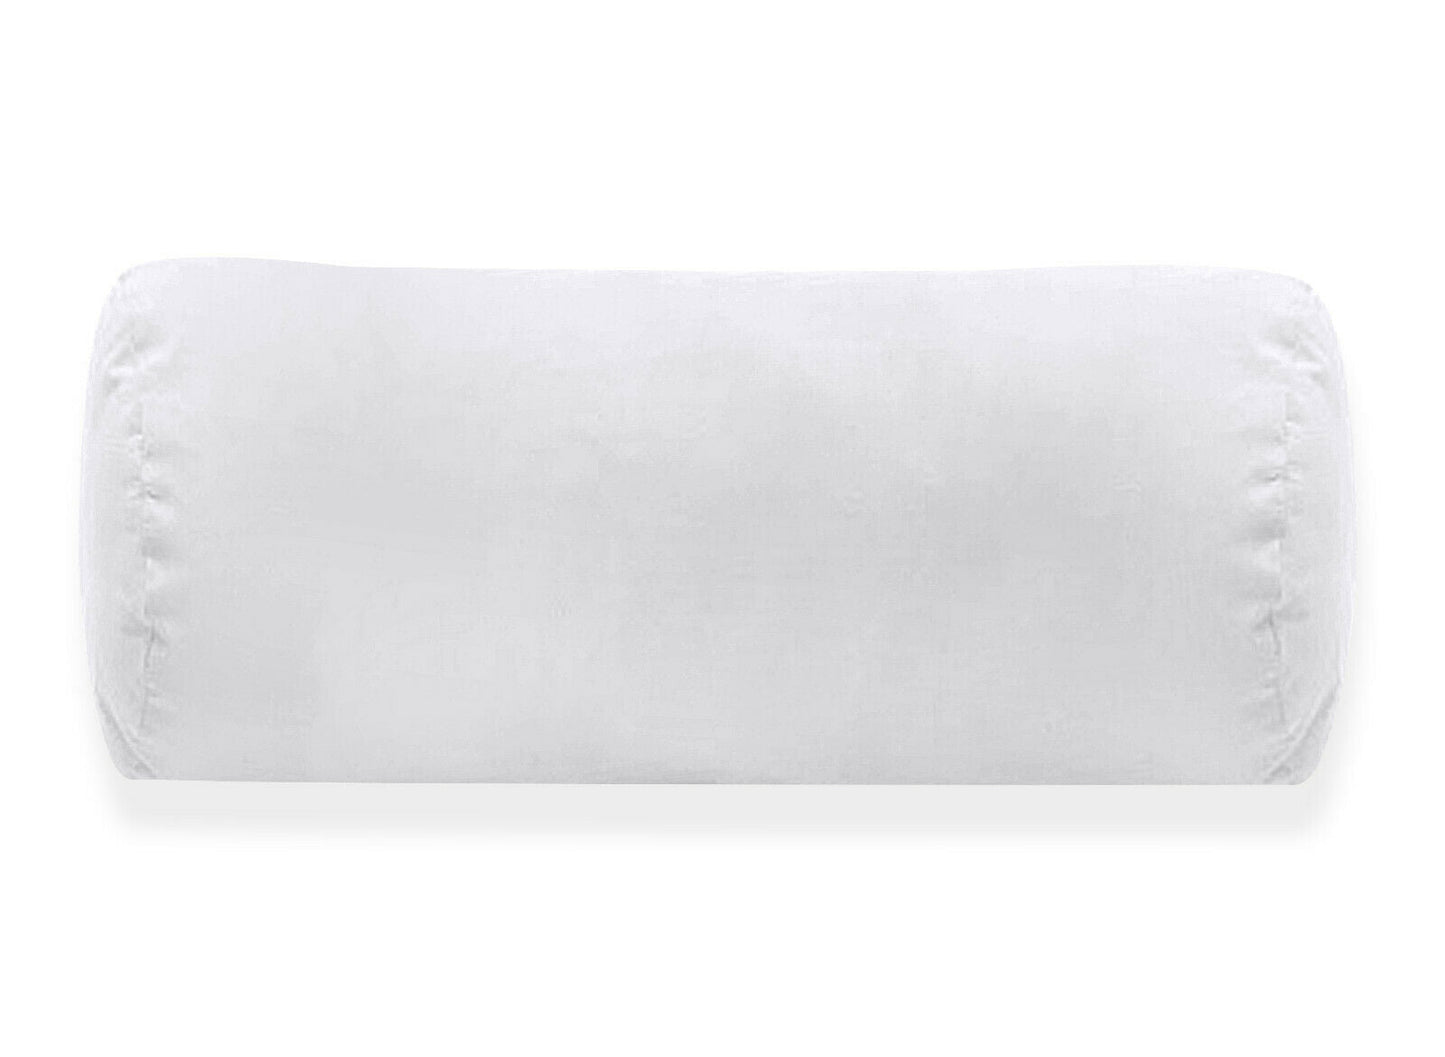 Round Shaped Bolster Pillow White Cushion Long Body Support Orthopaedic Pillow - Arlinens